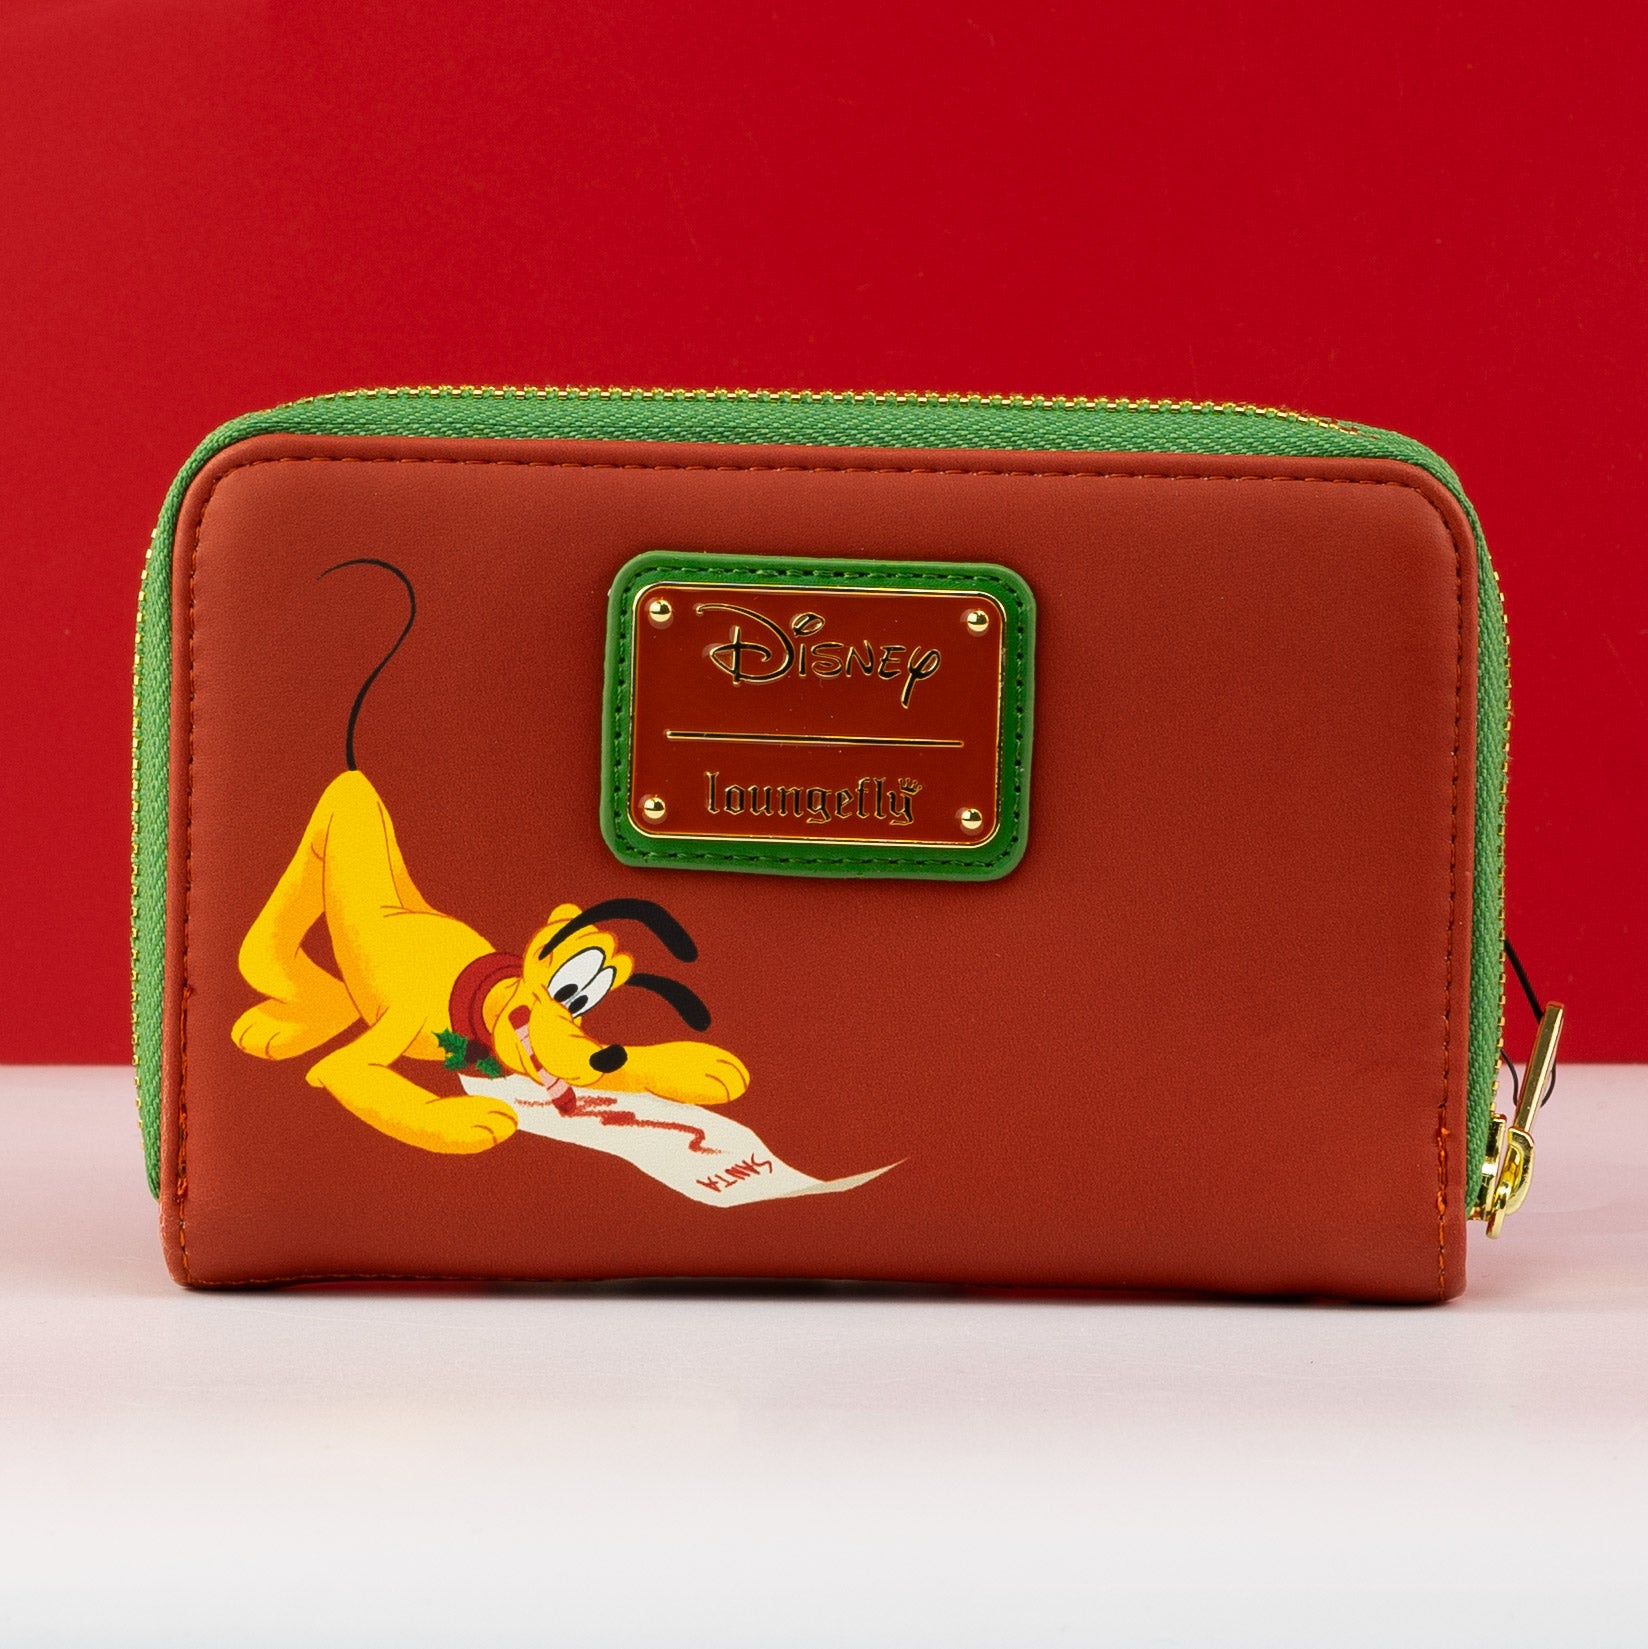 Loungefly x Disney Mickey and Minnie Christmas Fireplace Wallet